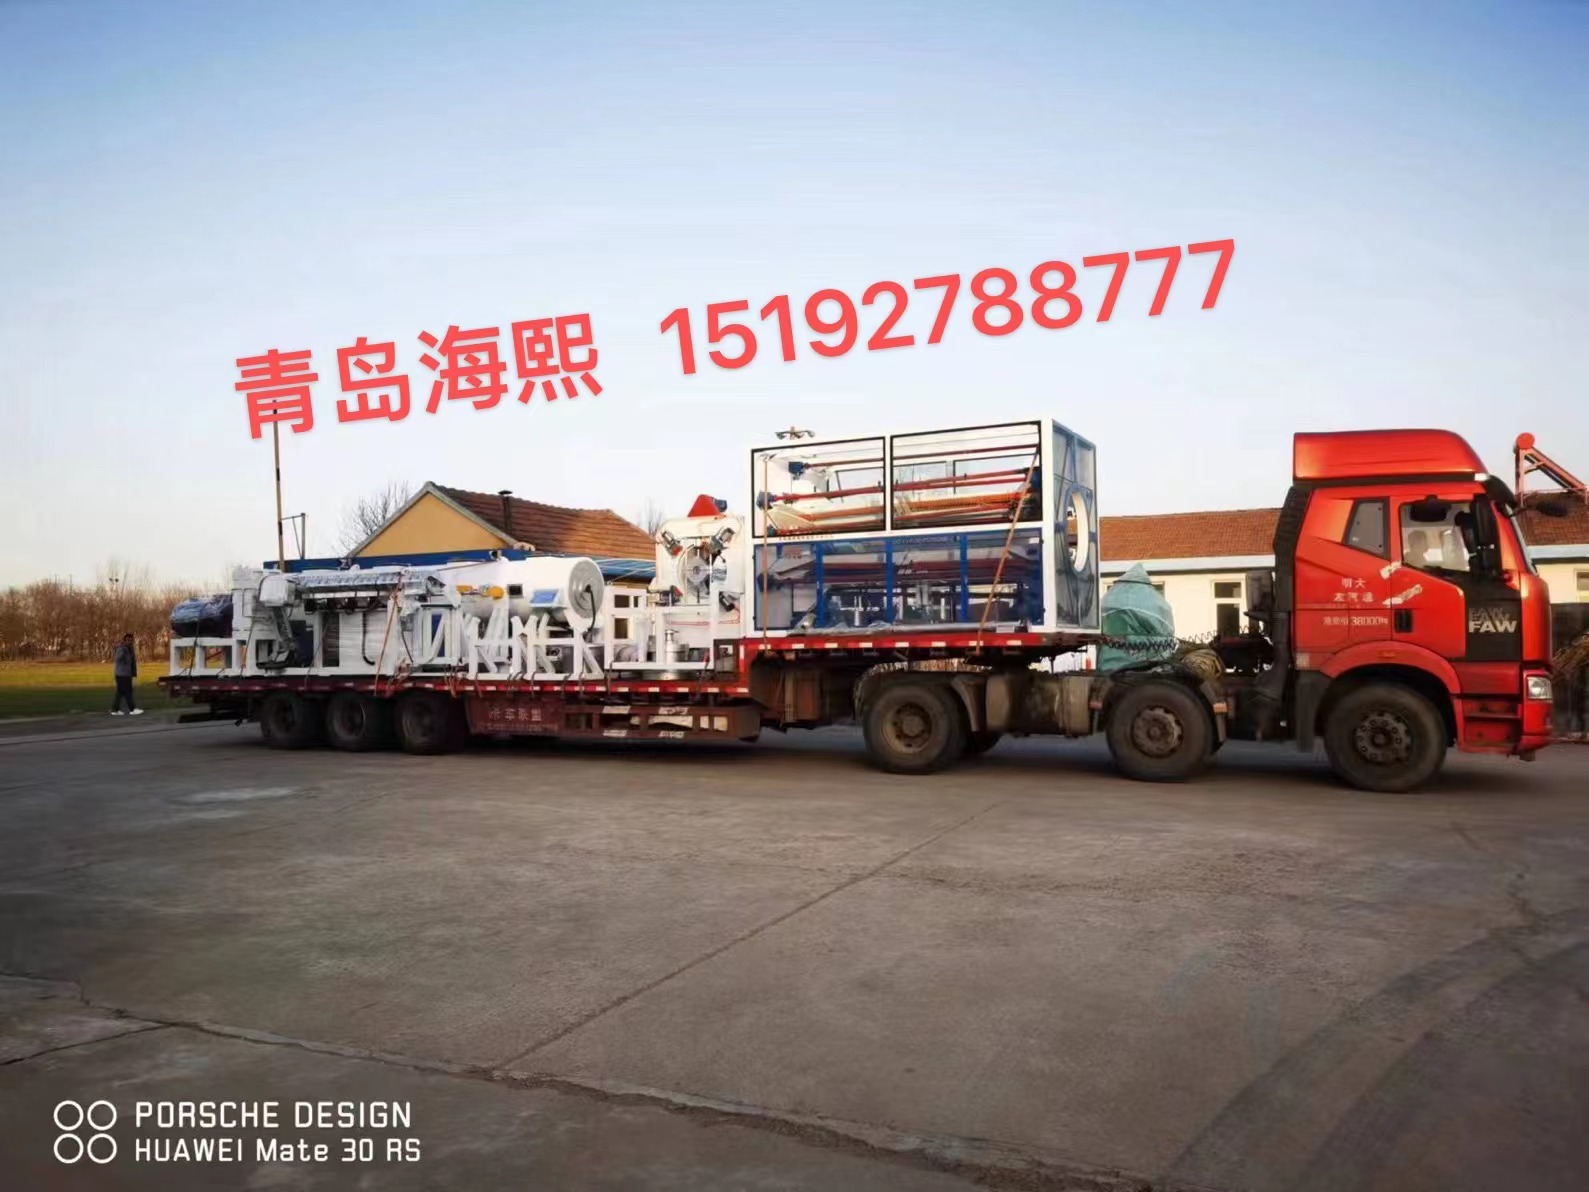 Hebei Kangye Pipeline Insulation and Anticorrosion Co., LTD